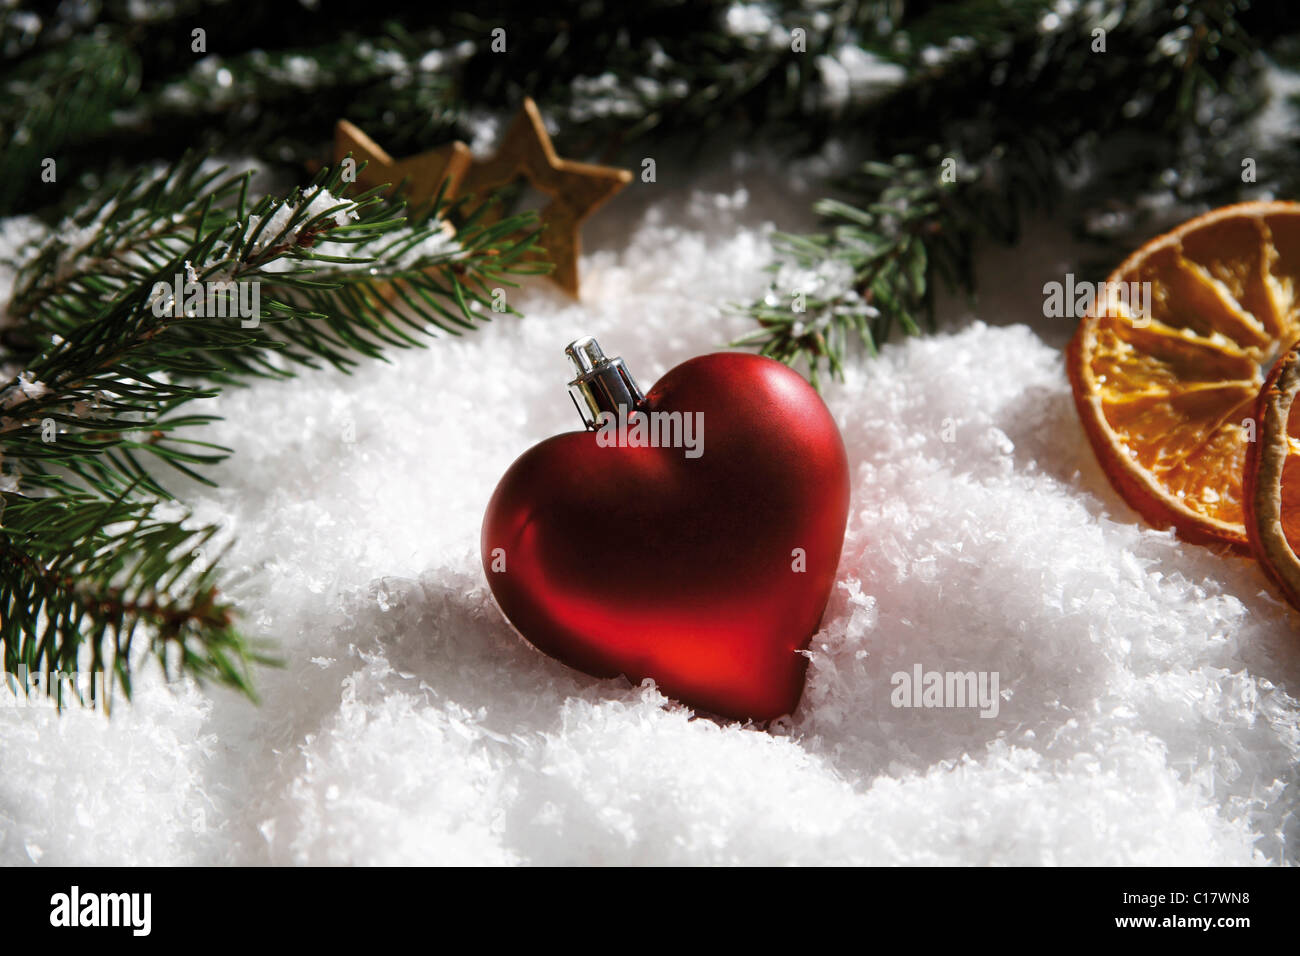 Heart-shaped Christmas tree bauble, branches of fir, dried orange slices and decorations on snow Stock Photo